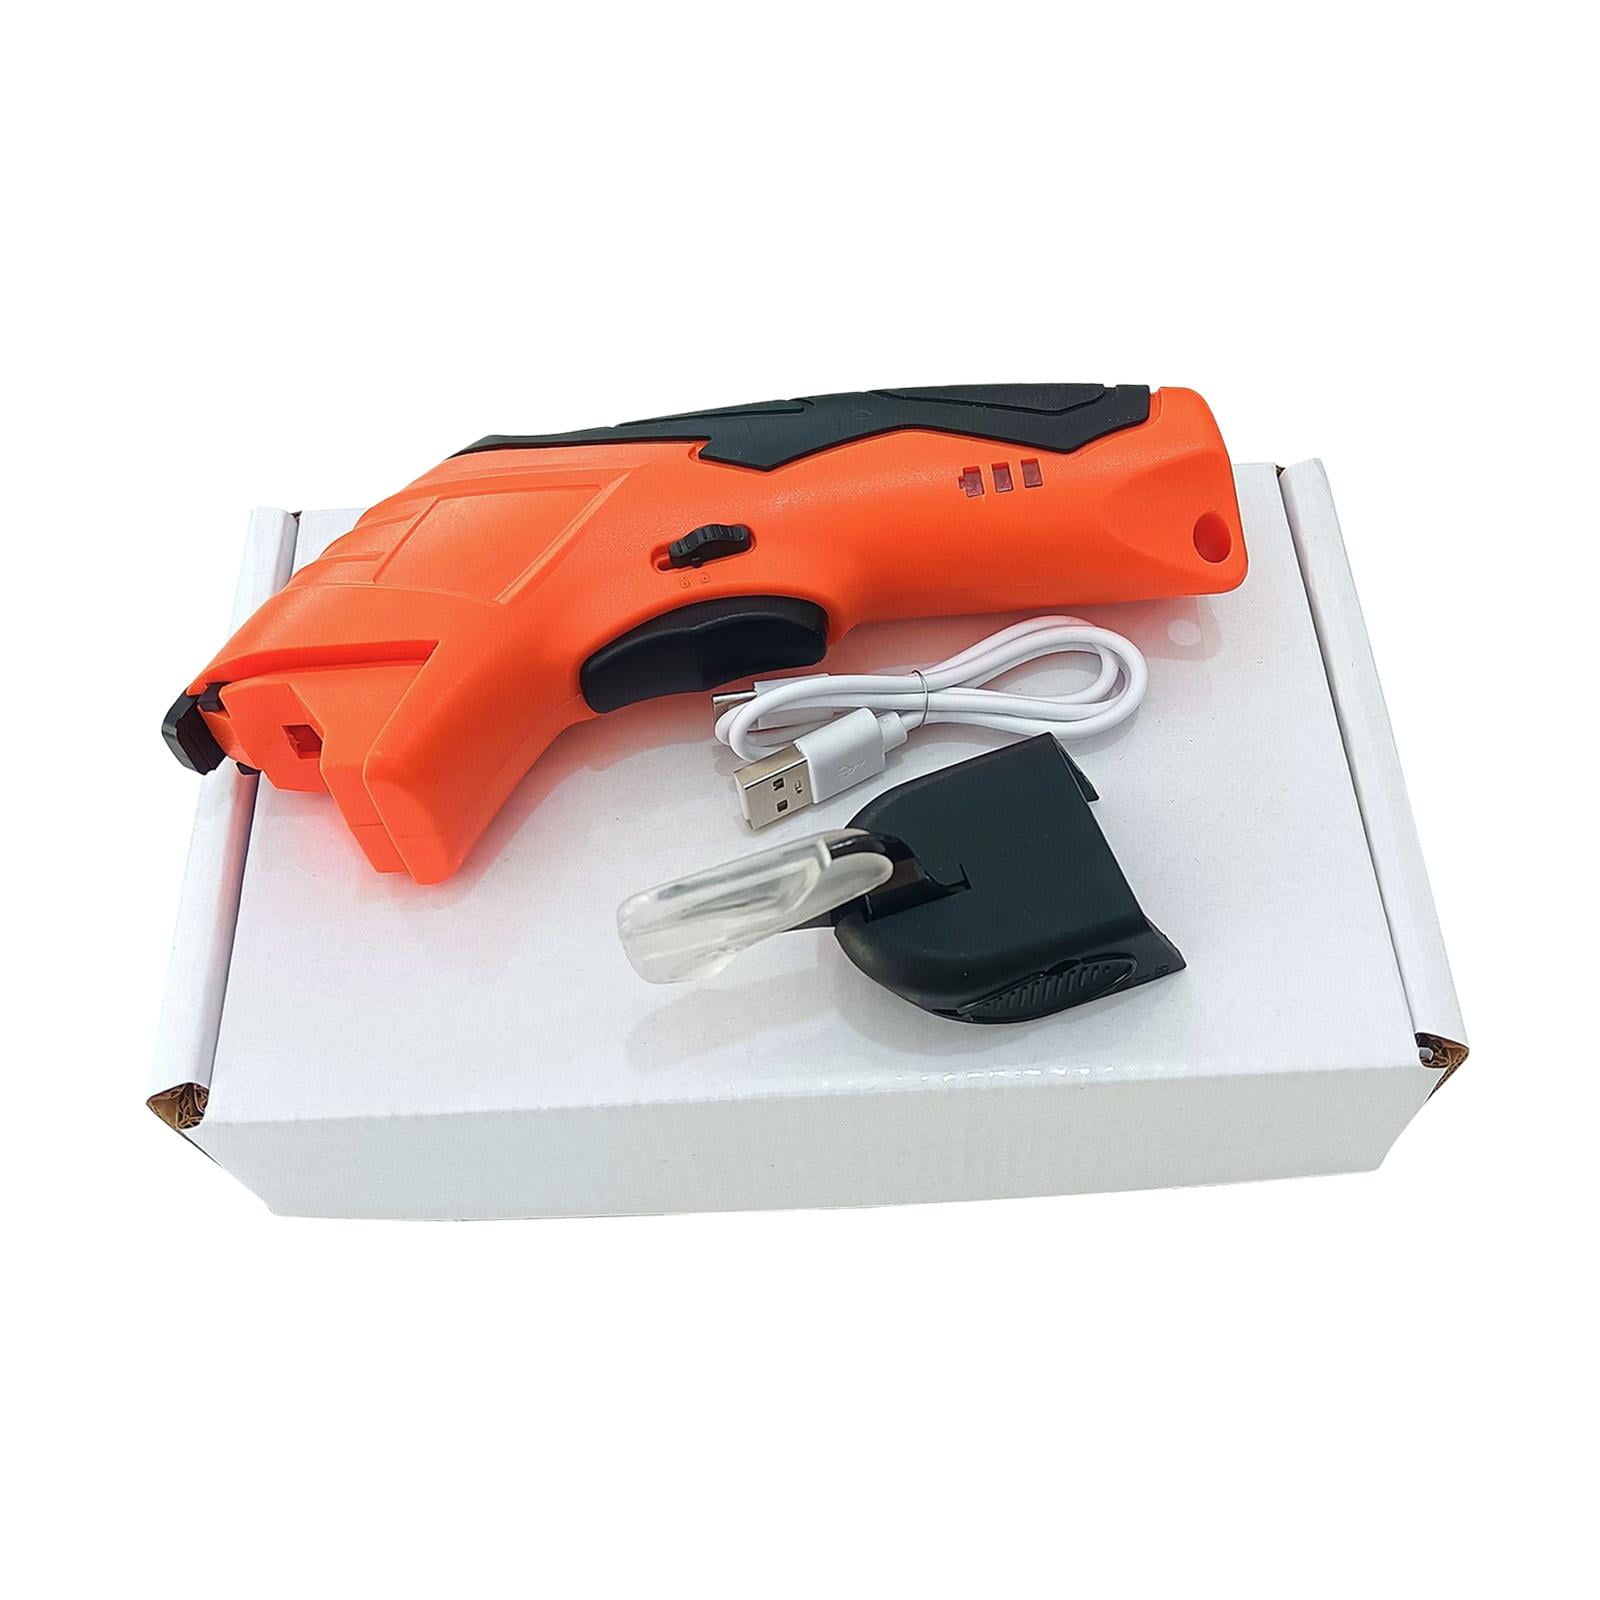 Cardboard Cutter Heavy Duty Professional Cutting Tool Rechargeable